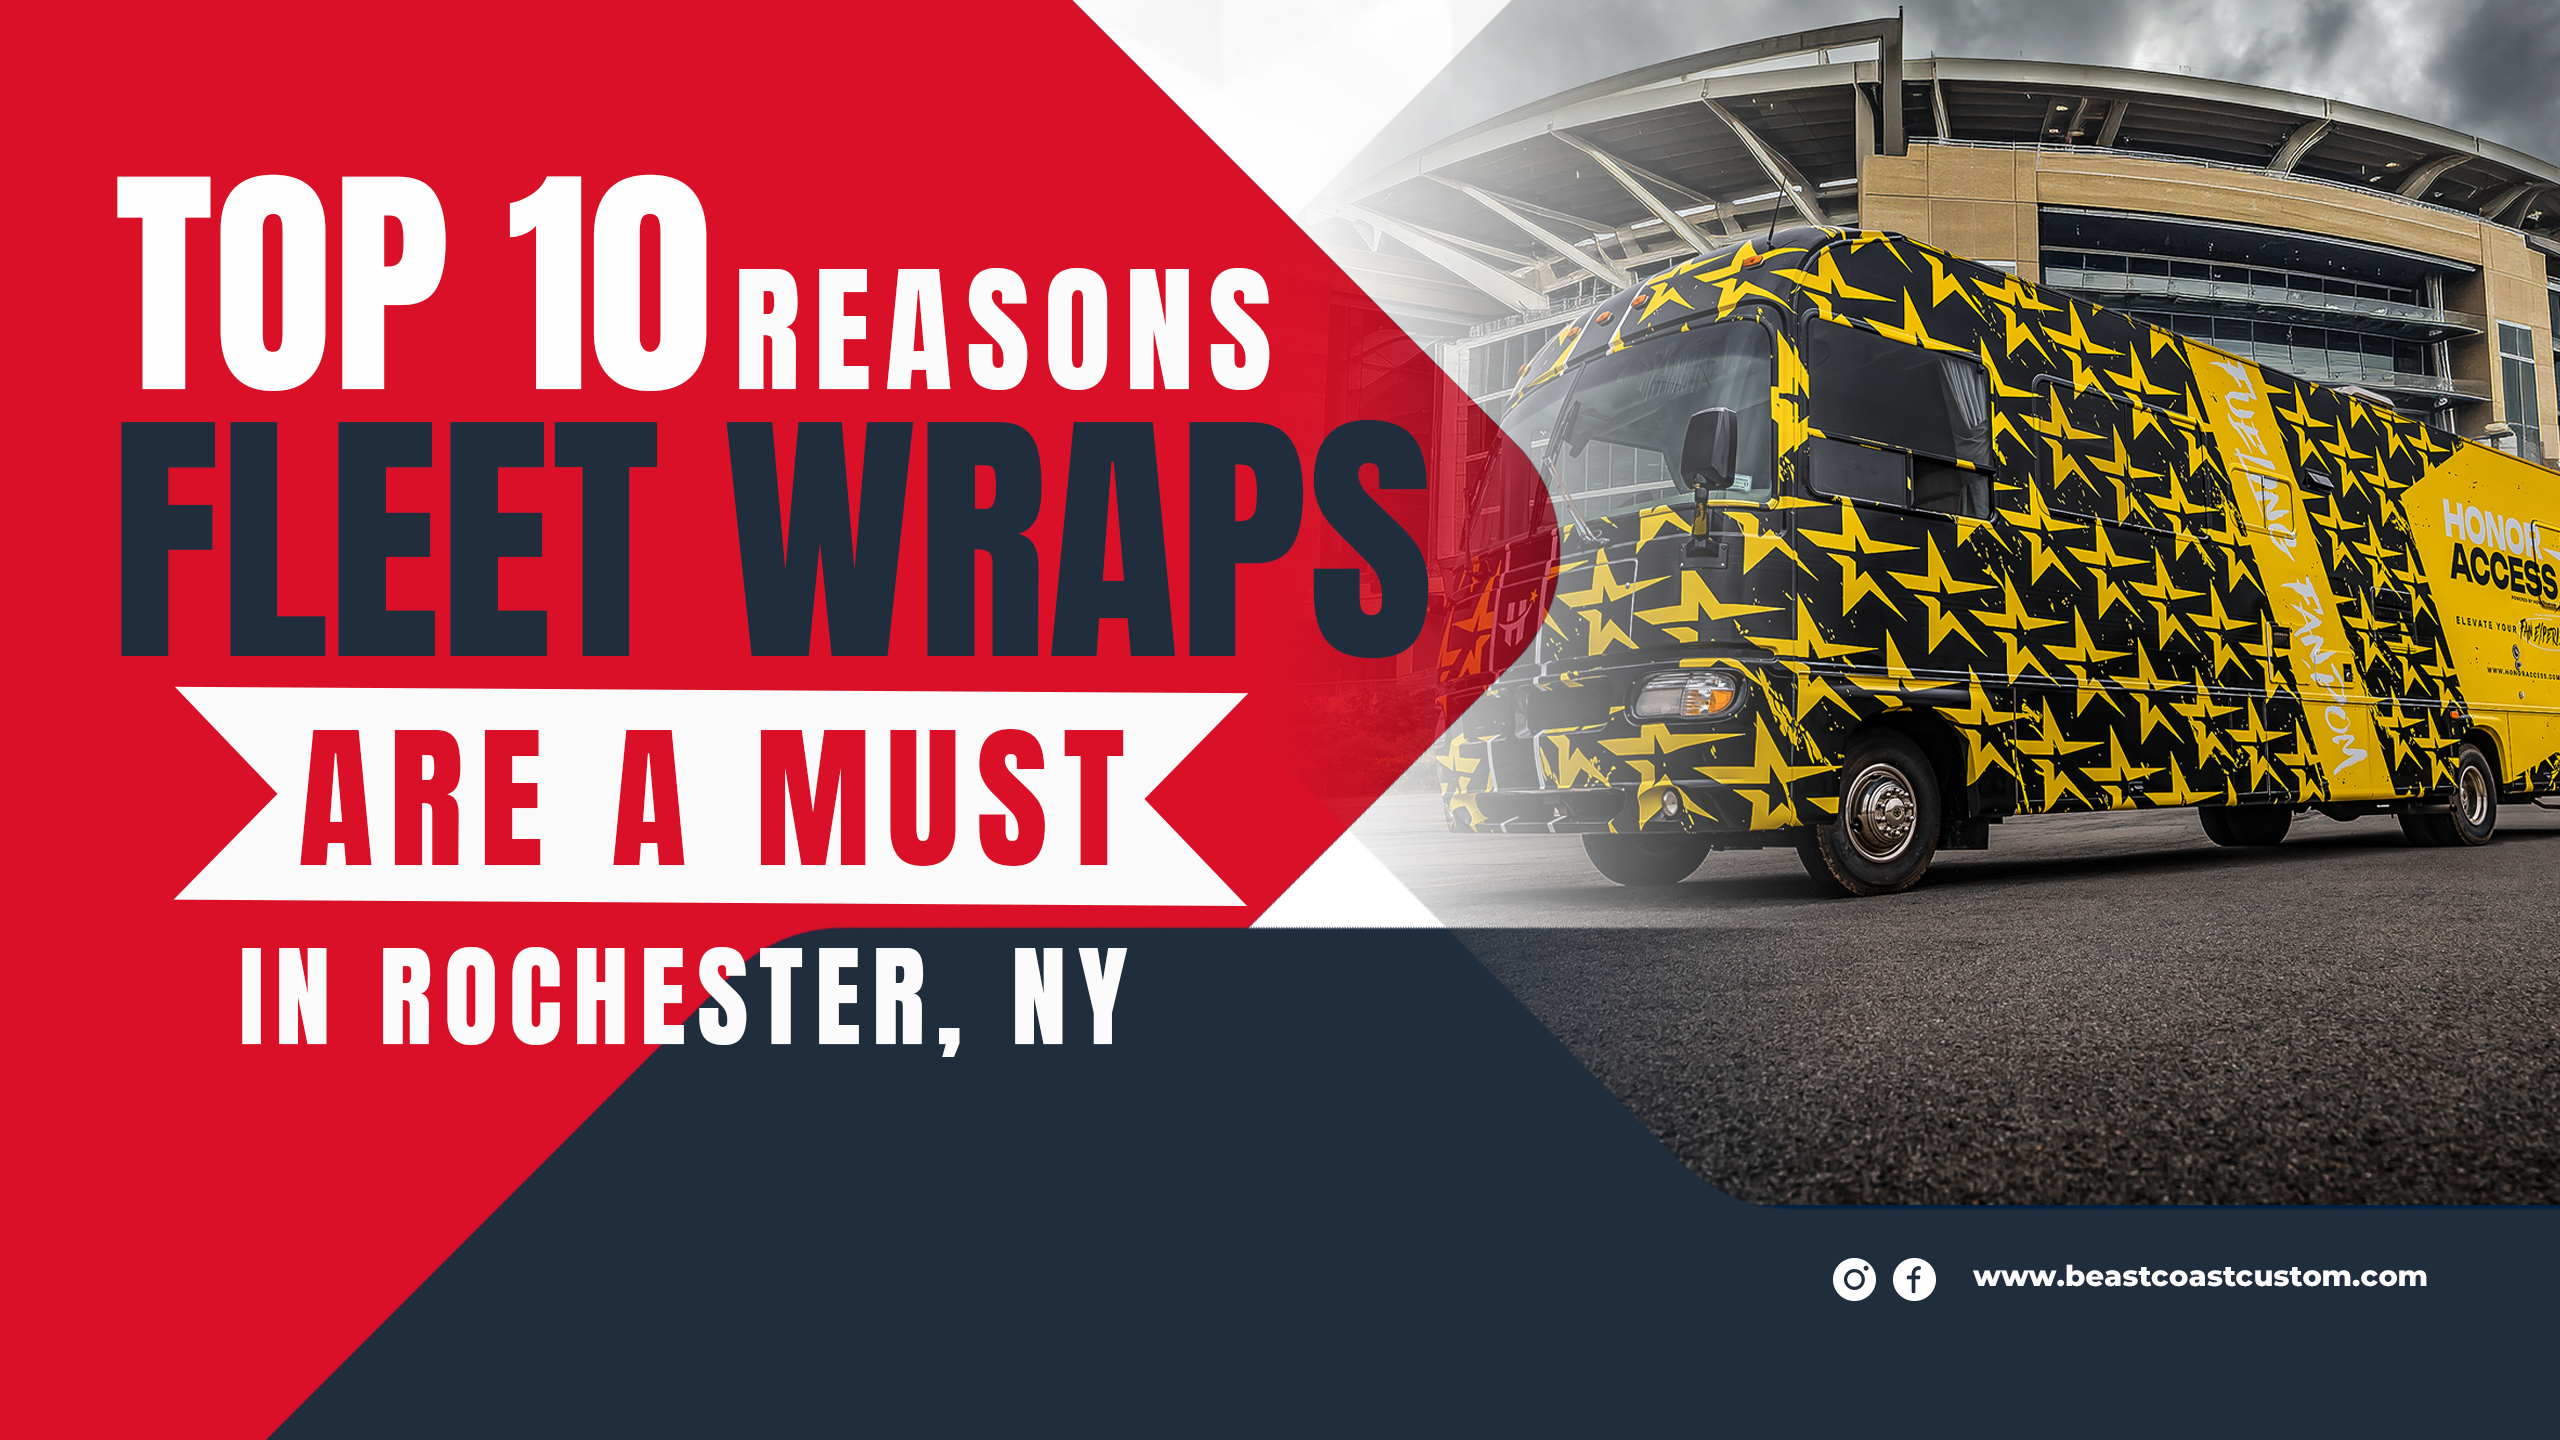 The Top 10 Reasons to Wrap Your Fleet Vehicles in Rochester, NY